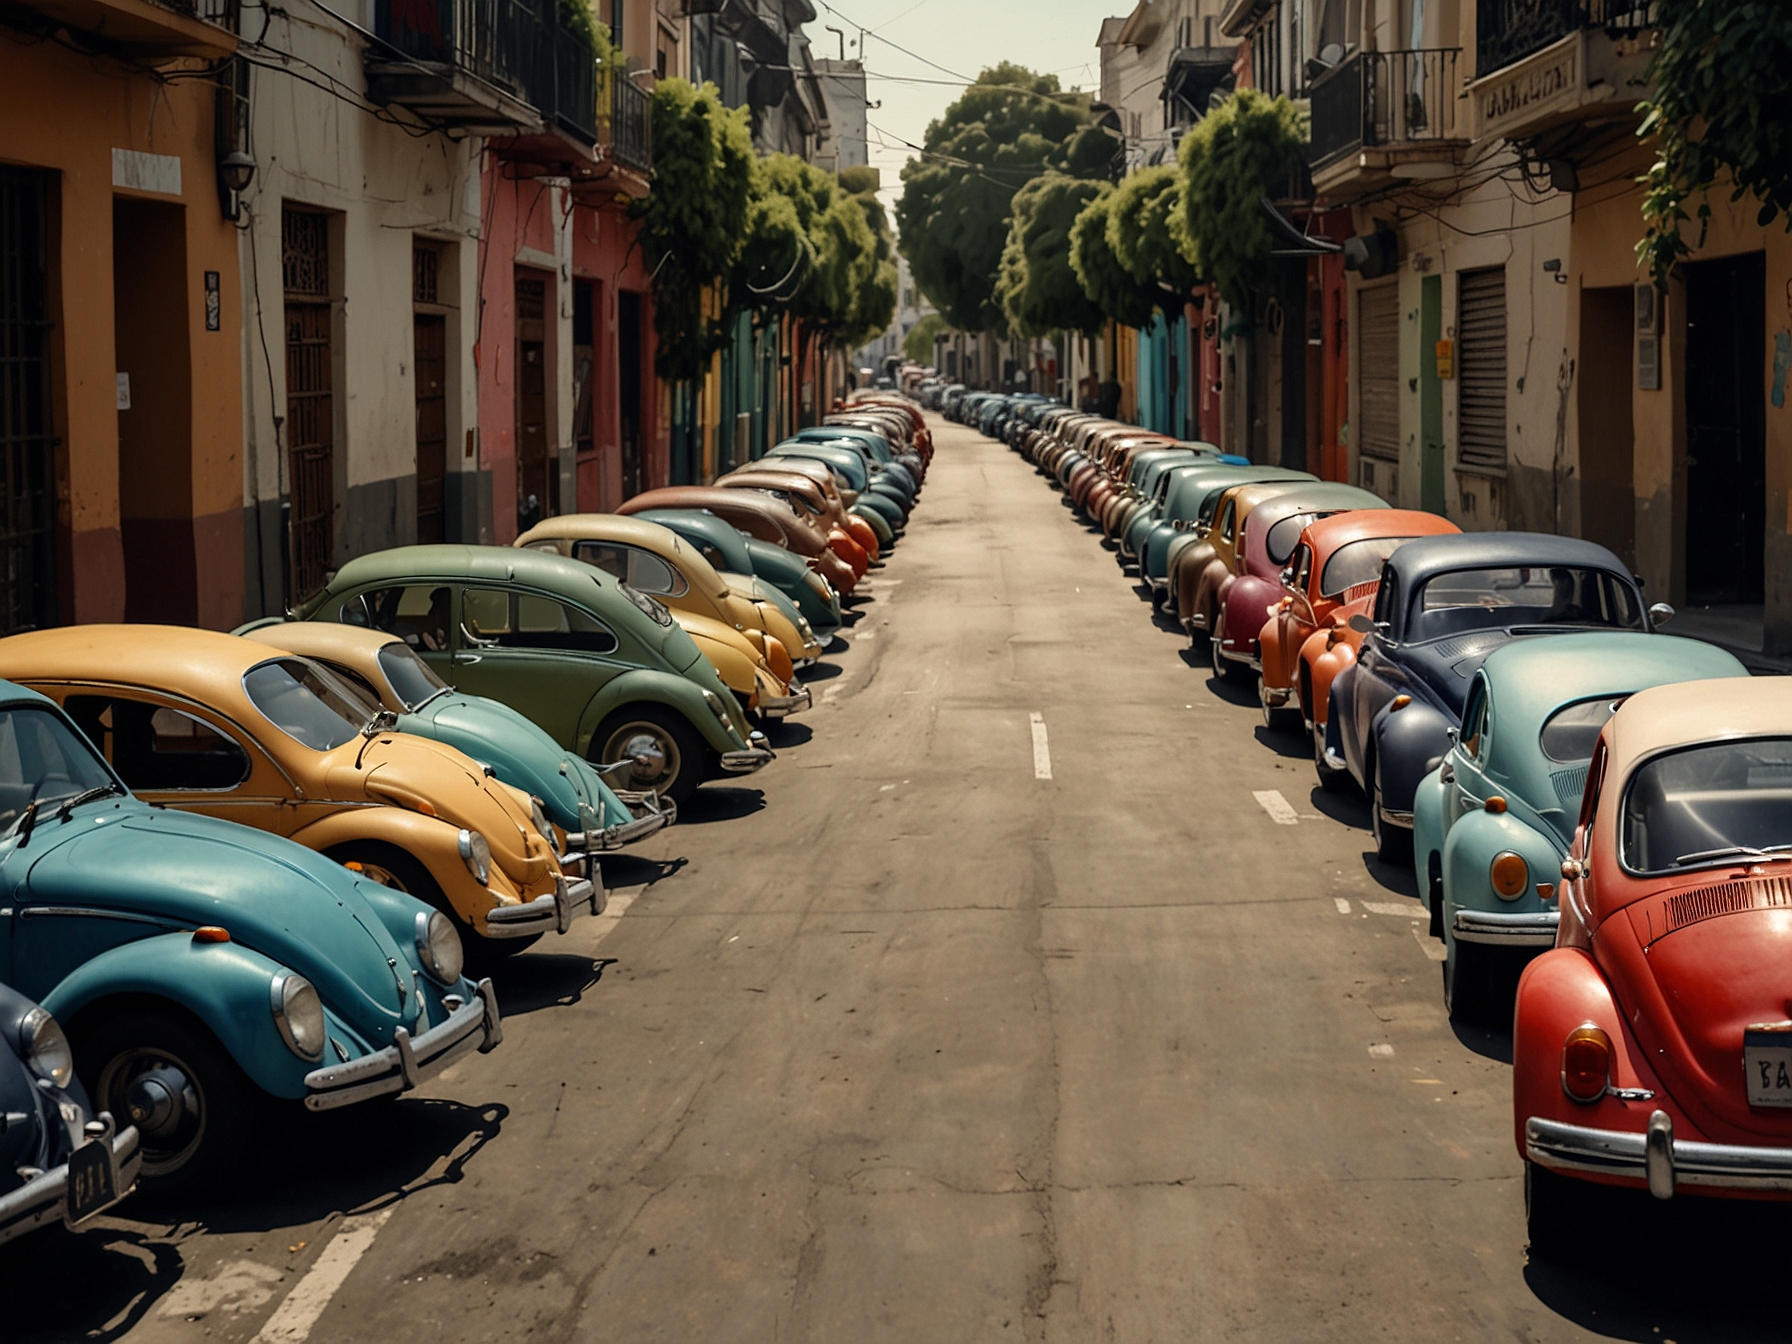 Rows of meticulously maintained Volkswagen Beetles line the streets of a Mexico City neighborhood, reflecting the diverse personalities of their owners and the community’s commitment to preserving the iconic car.